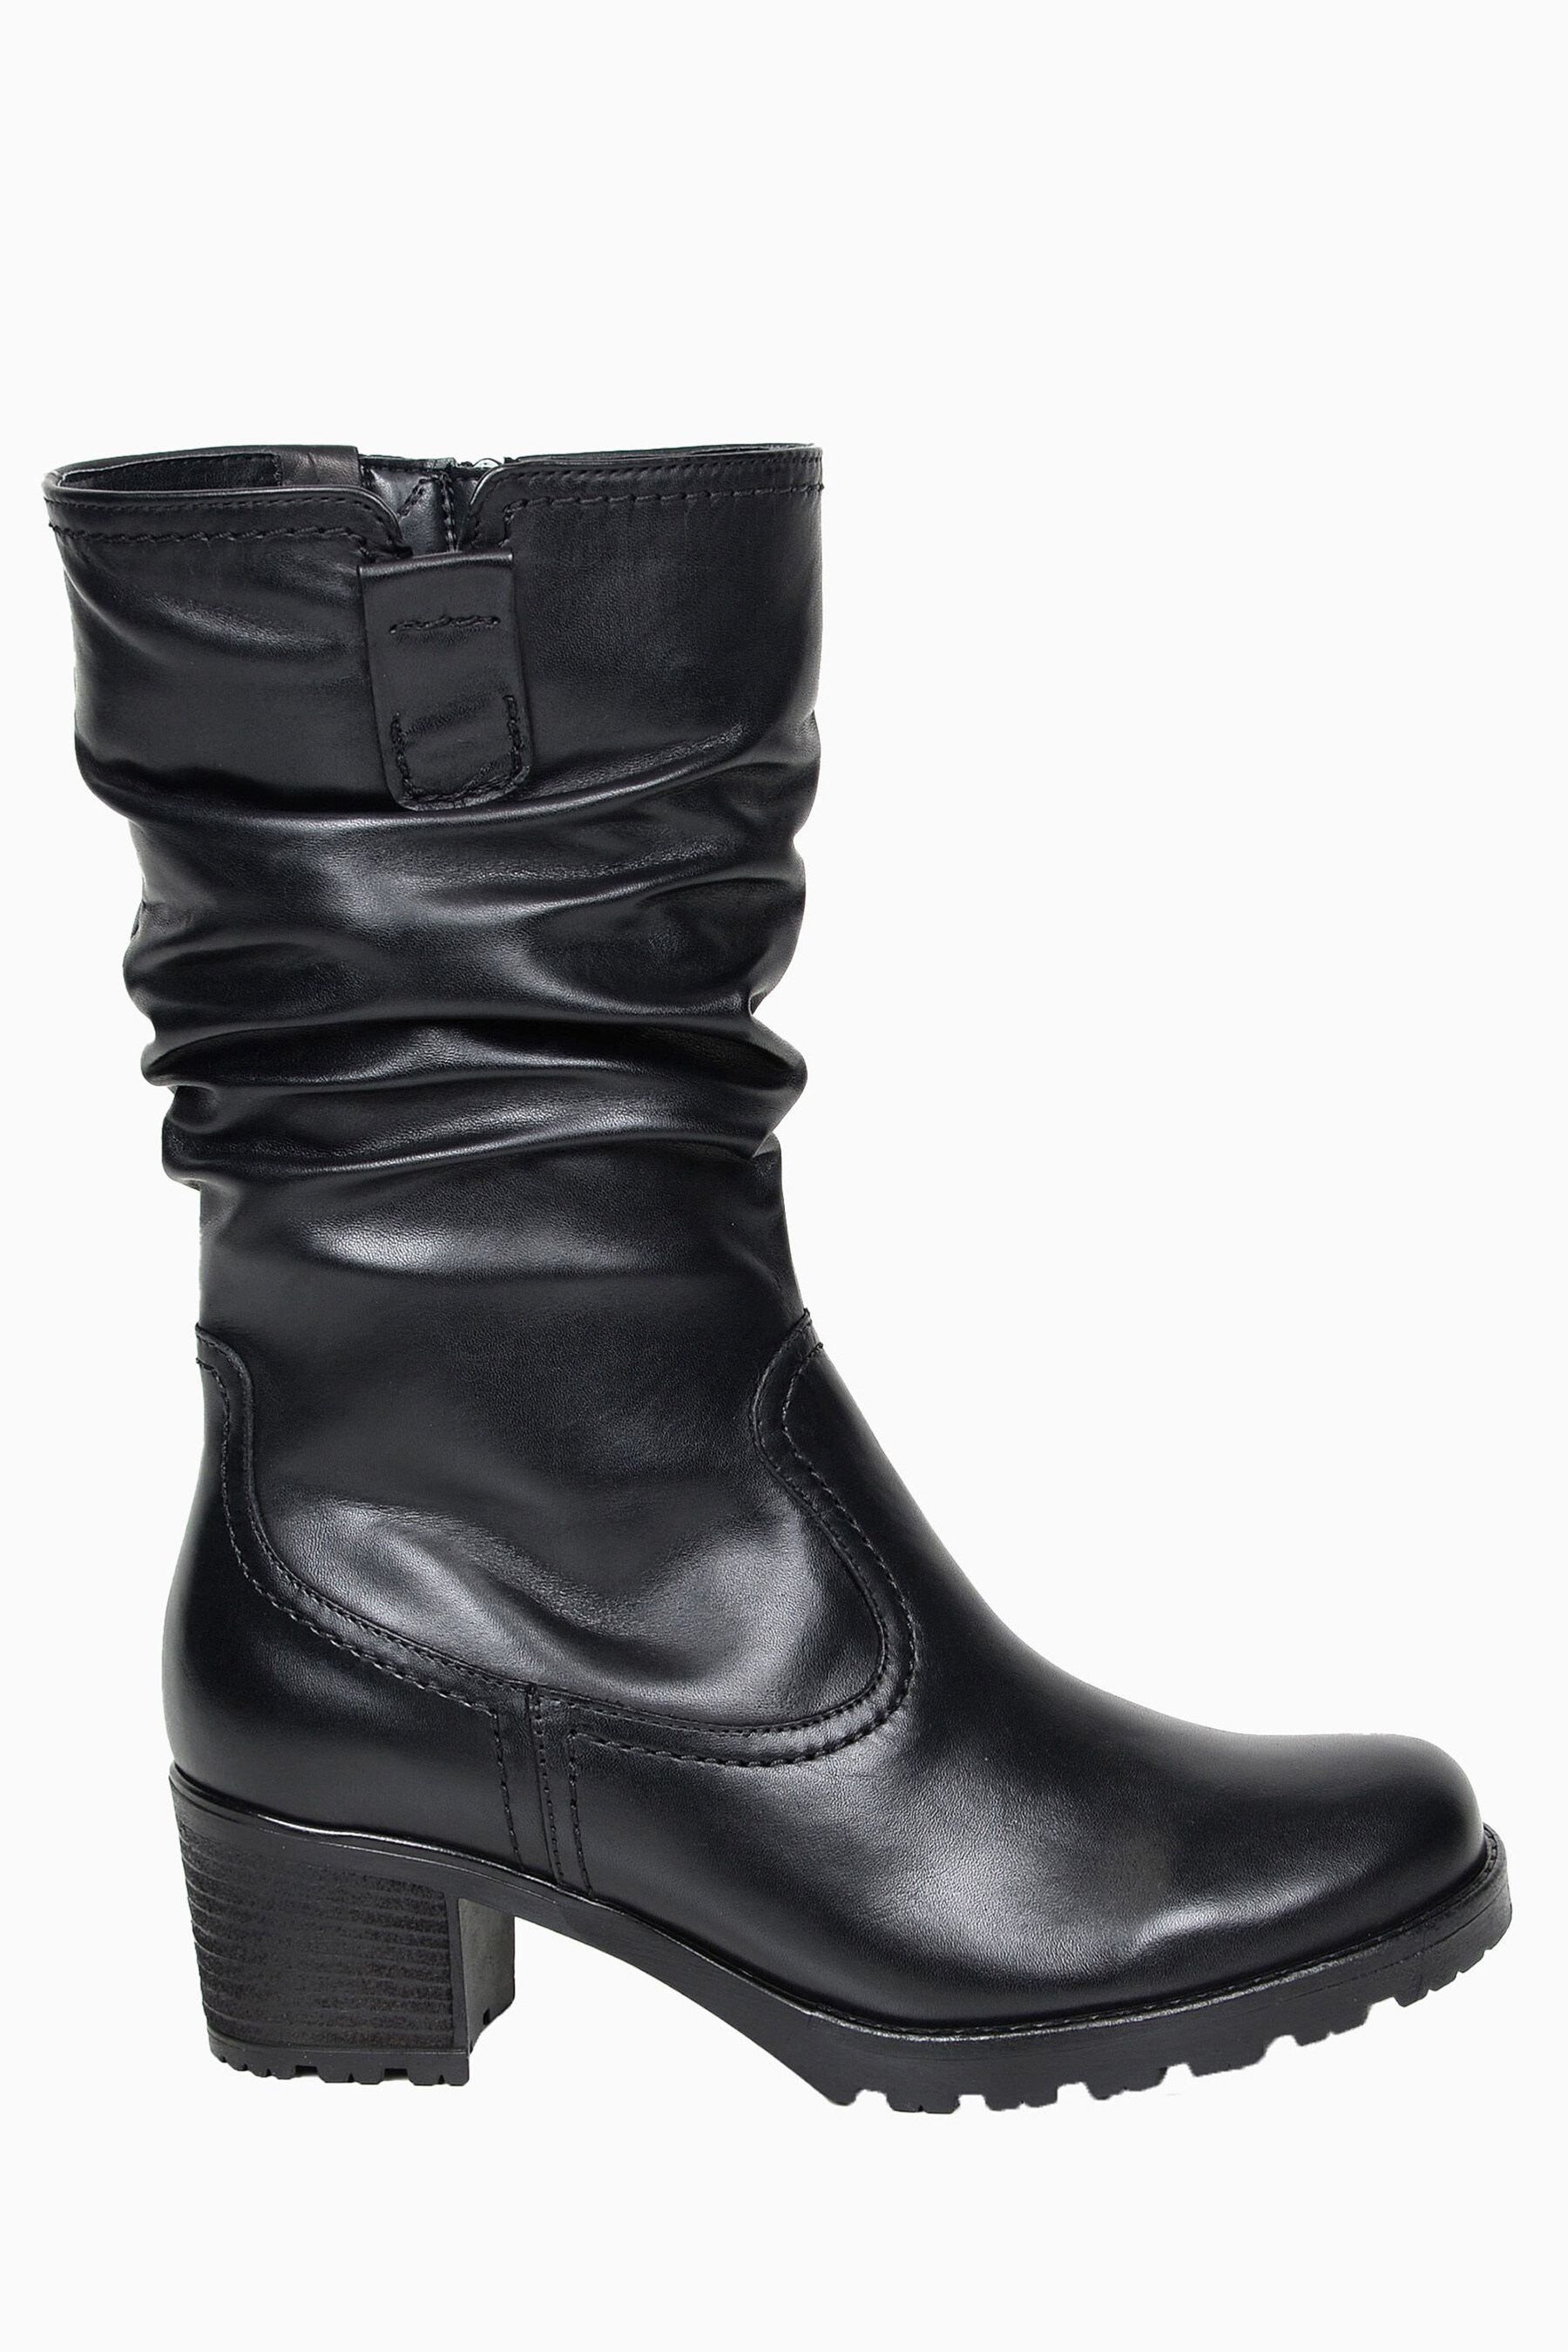 Buy Gabor Dunmow Black Leather Calf Length Fashion Boots from the Next ...